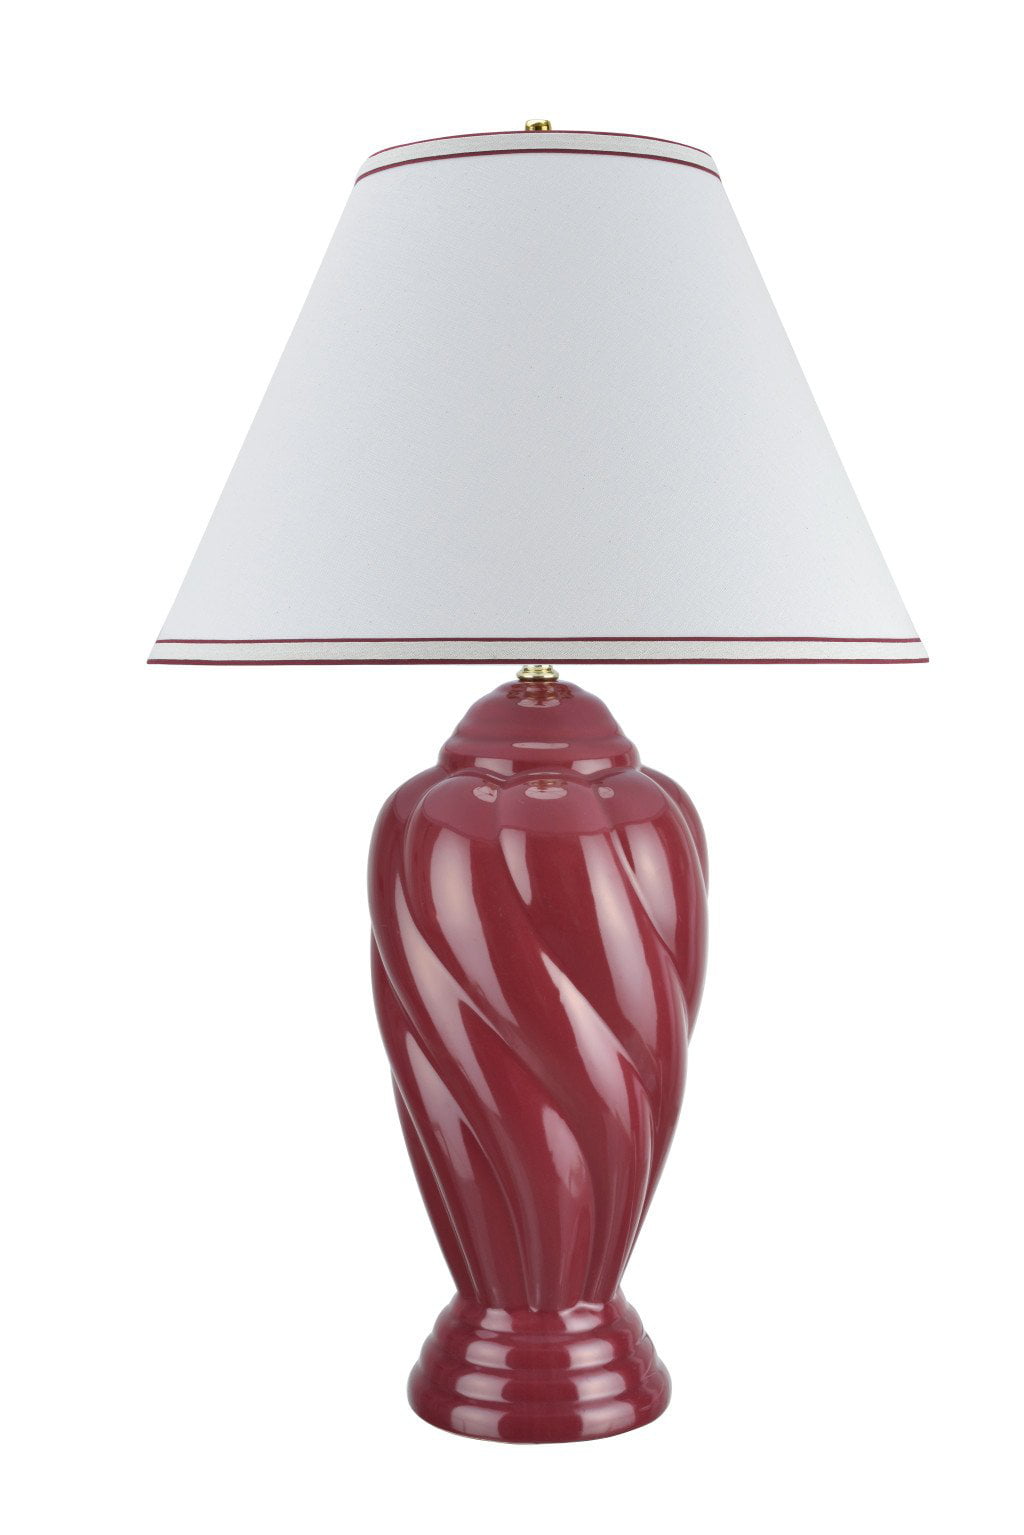 15 Wide Burgundy with Pewter Finish Base and Hardback Empire Shaped Lamp Shade in Off White Aspen Creative 40093-4 26 High Traditional Ceramic Table